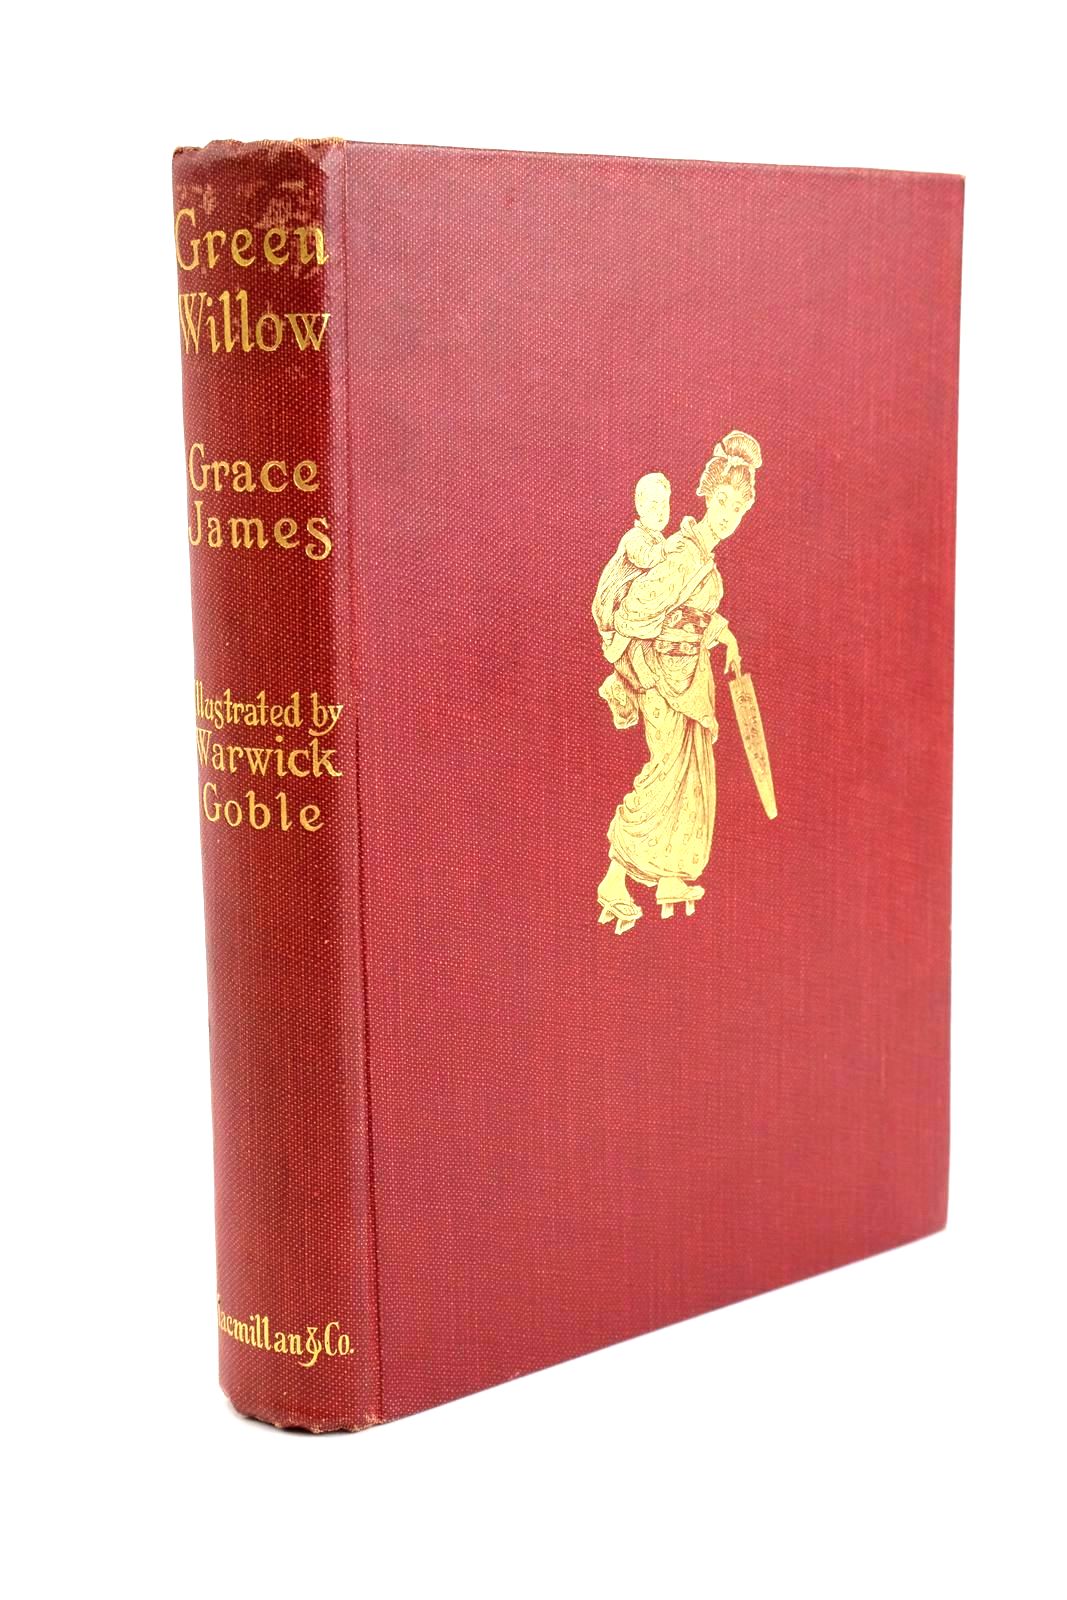 Photo of GREEN WILLOW AND OTHER JAPANESE FAIRY TALES written by James, Grace illustrated by Goble, Warwick published by Macmillan &amp; Co. Ltd. (STOCK CODE: 1323375)  for sale by Stella & Rose's Books